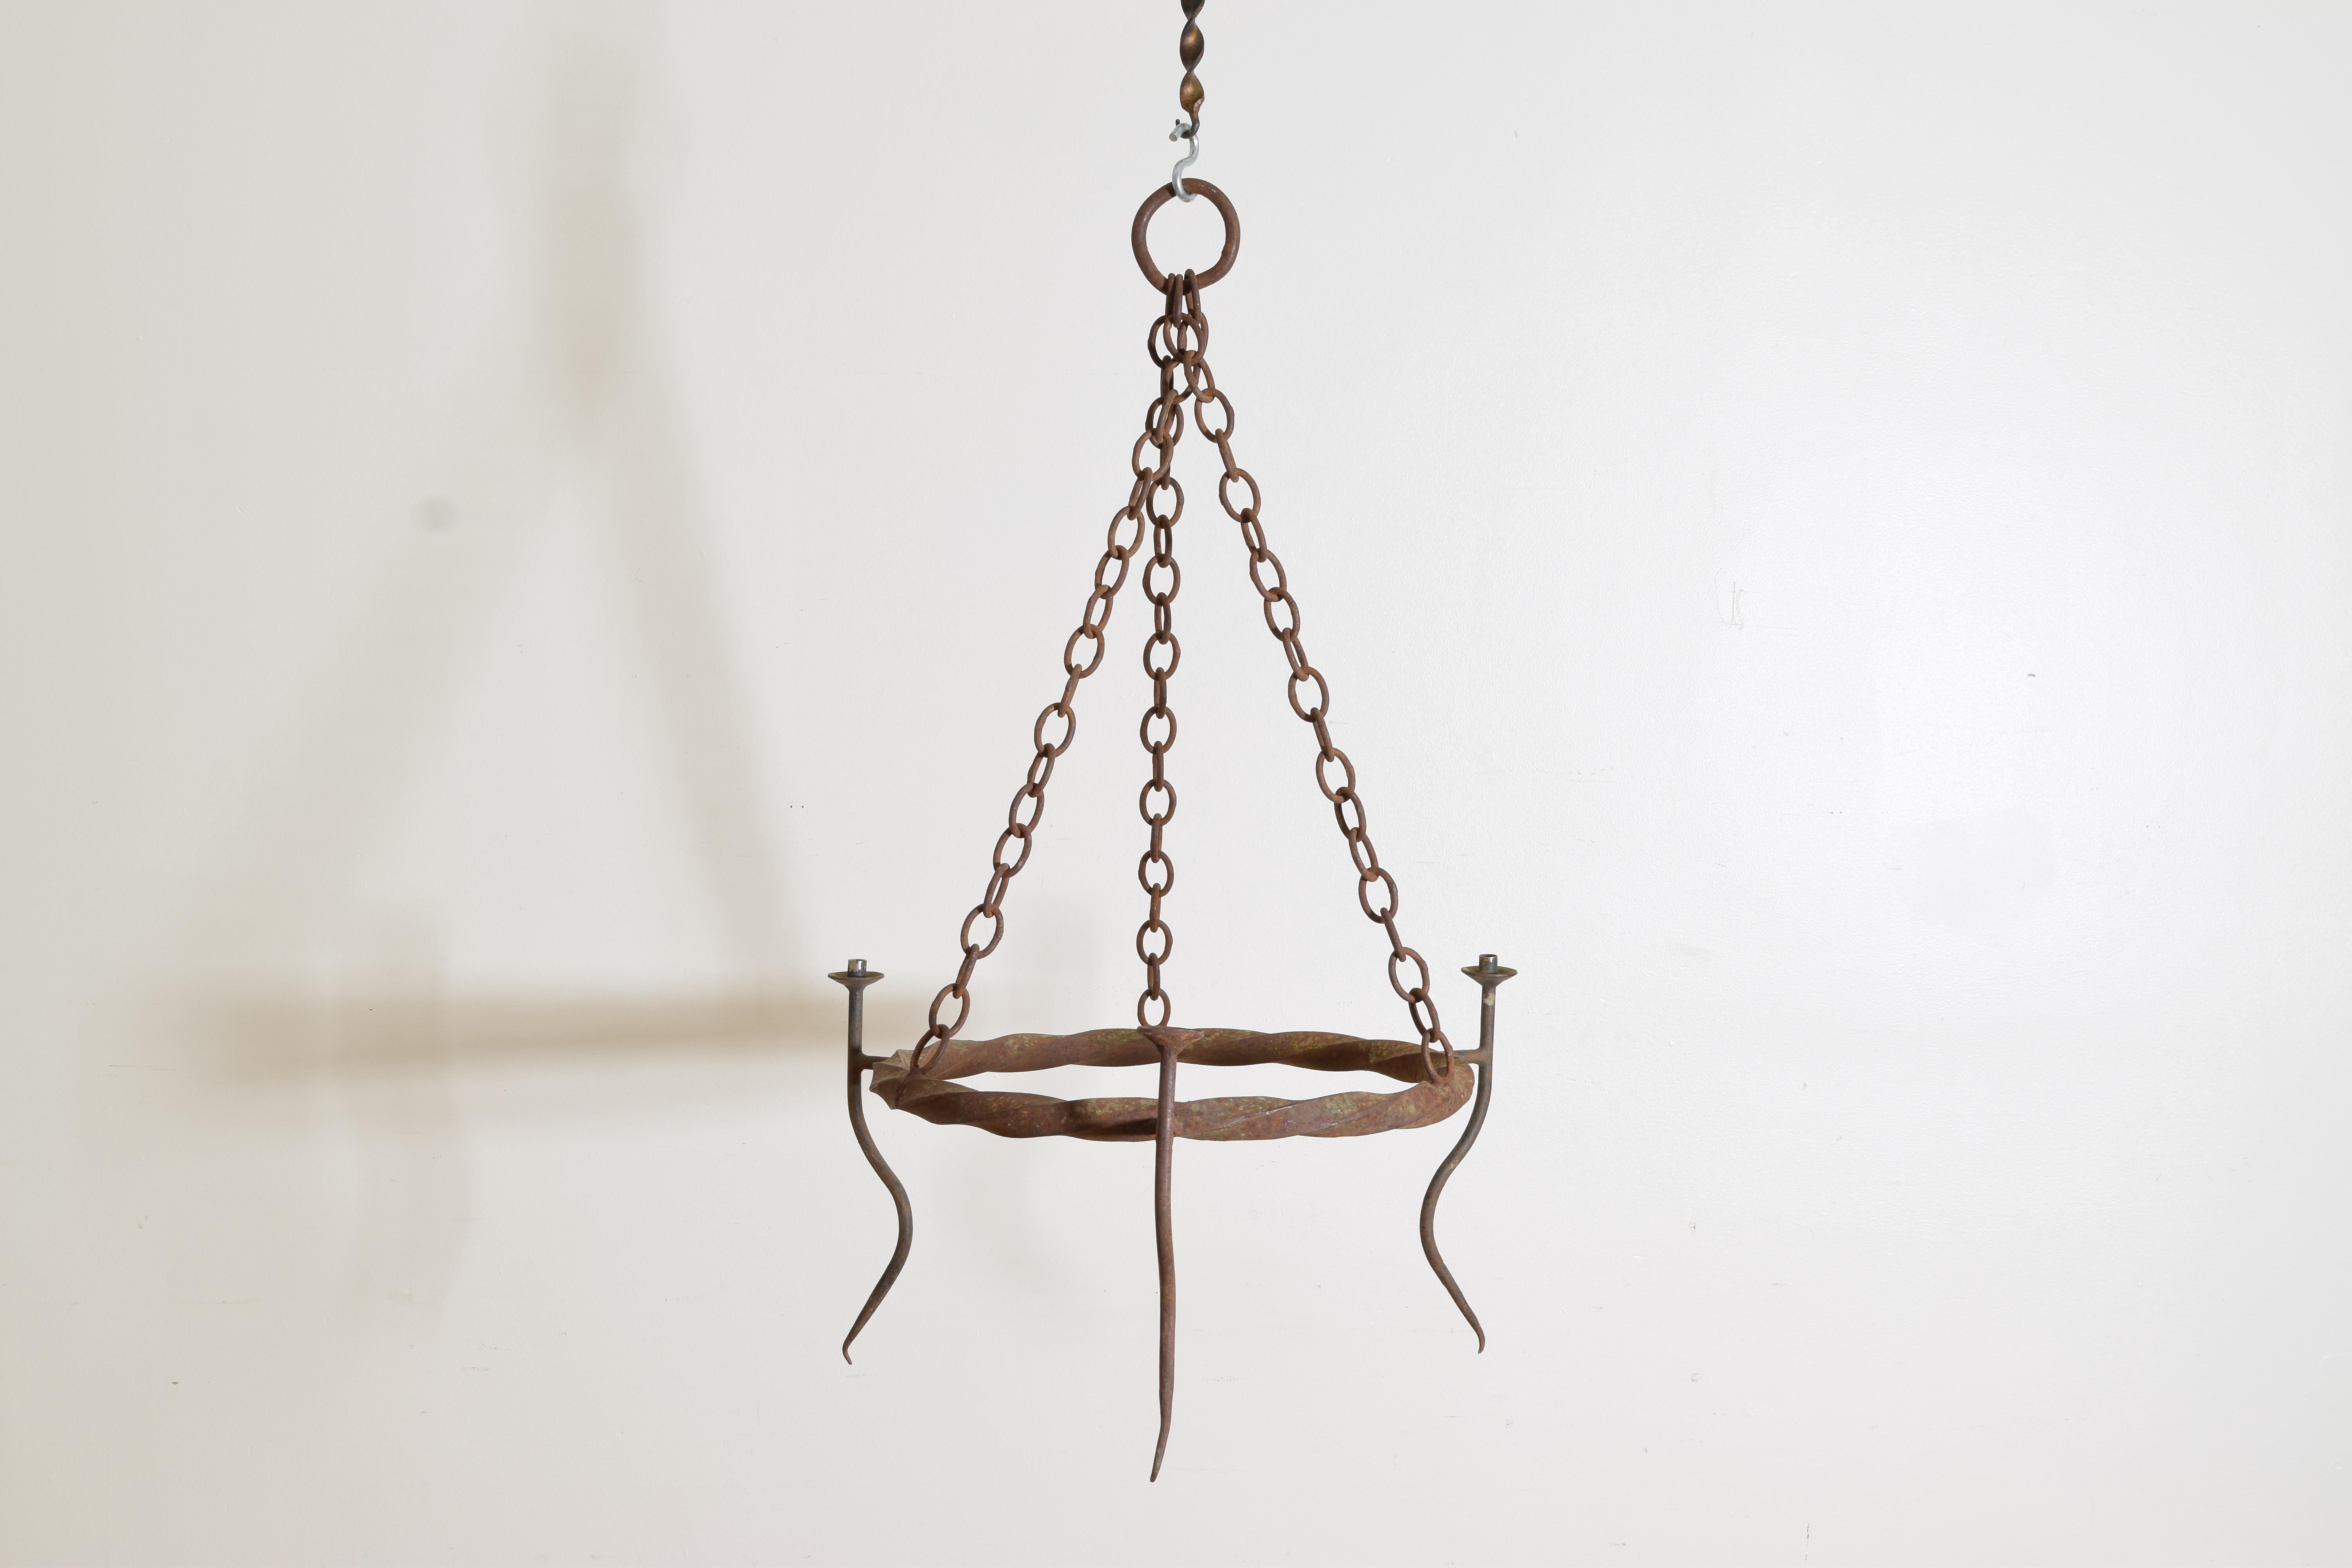 With three strands of original chain hanging from a large wring, the circular frame of twisted iron issuing three serpentine form arms